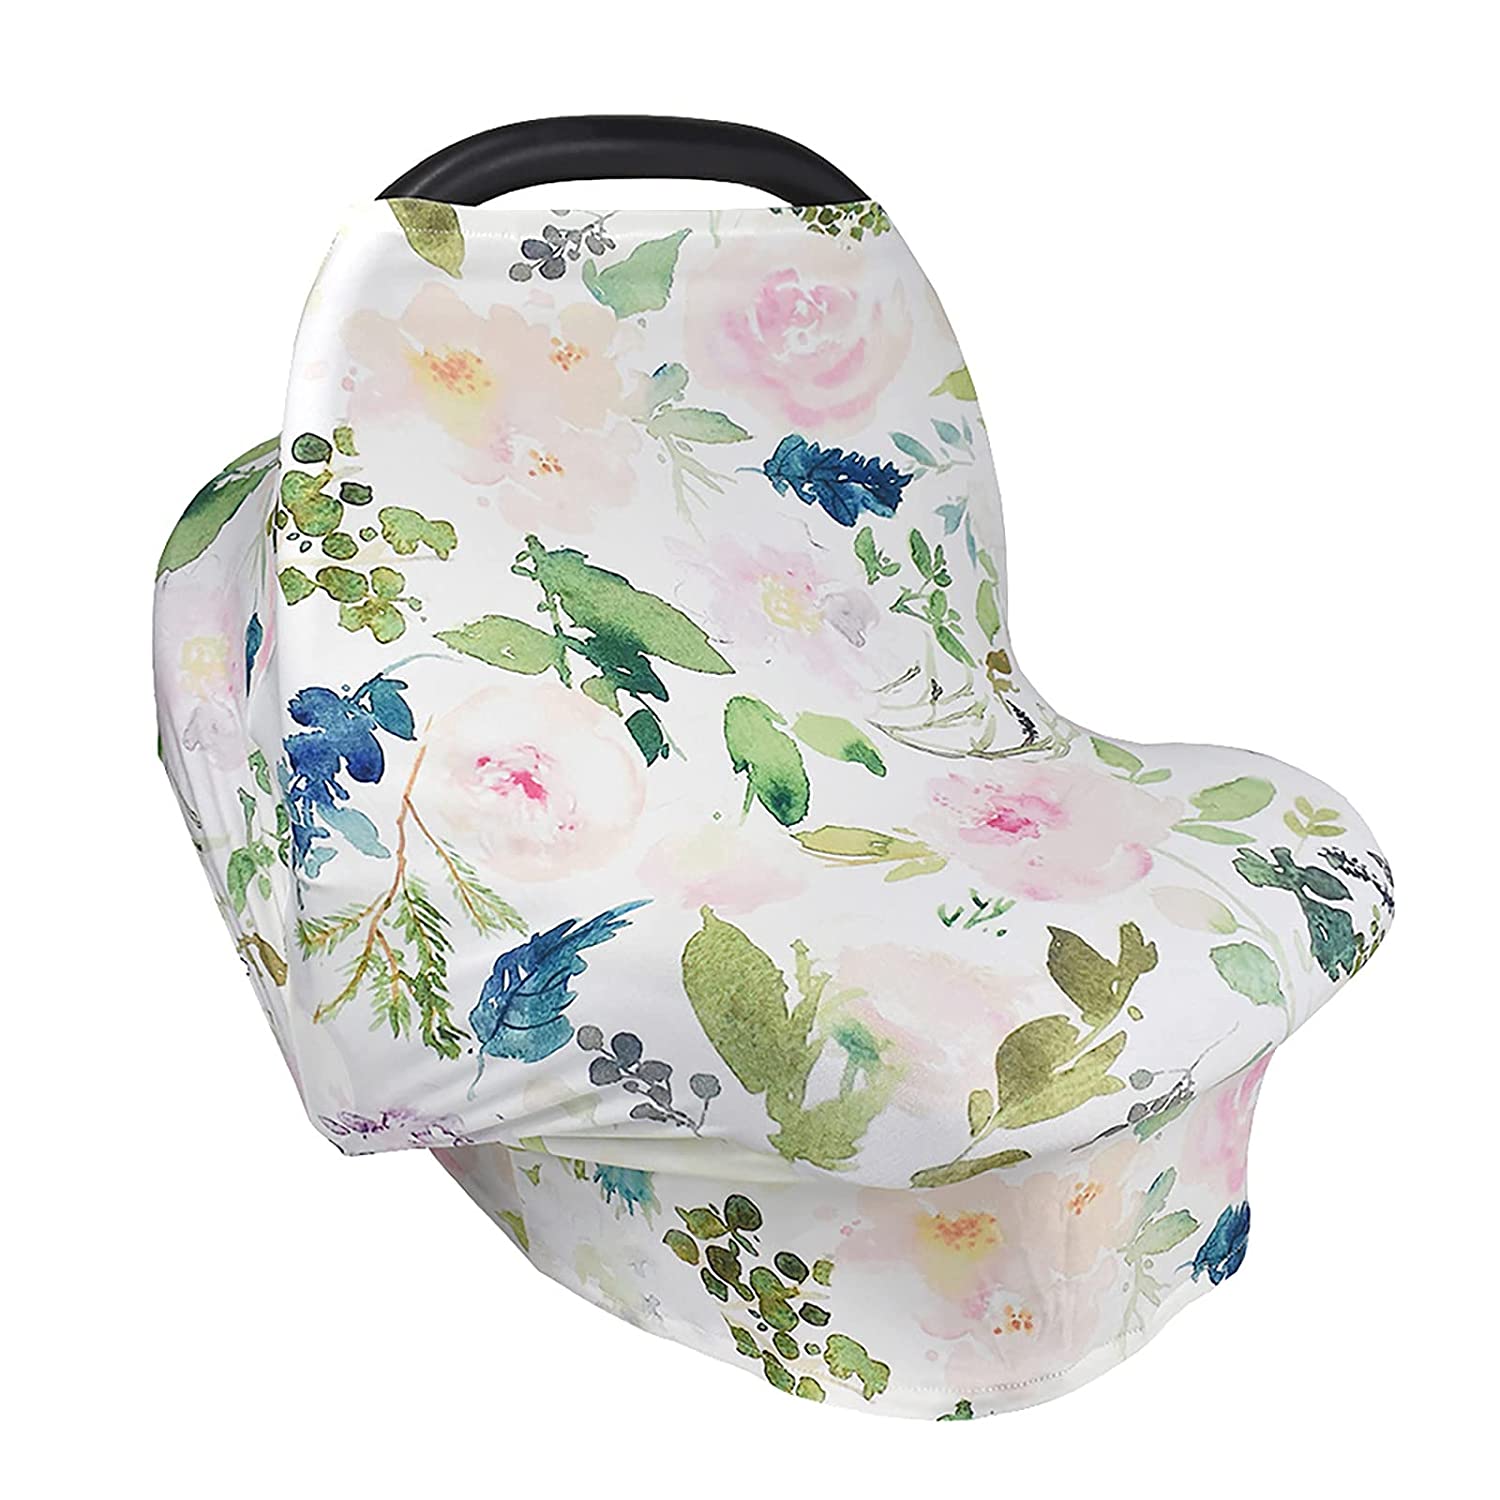 Dibiao Girls Infant Care Breastfeeding Cover Car Seat Canopy Stretchy Baby Car Seat Cover for Newborn Boys Shopping Cart High Chair Pram Cover Scarf Soft Breathable